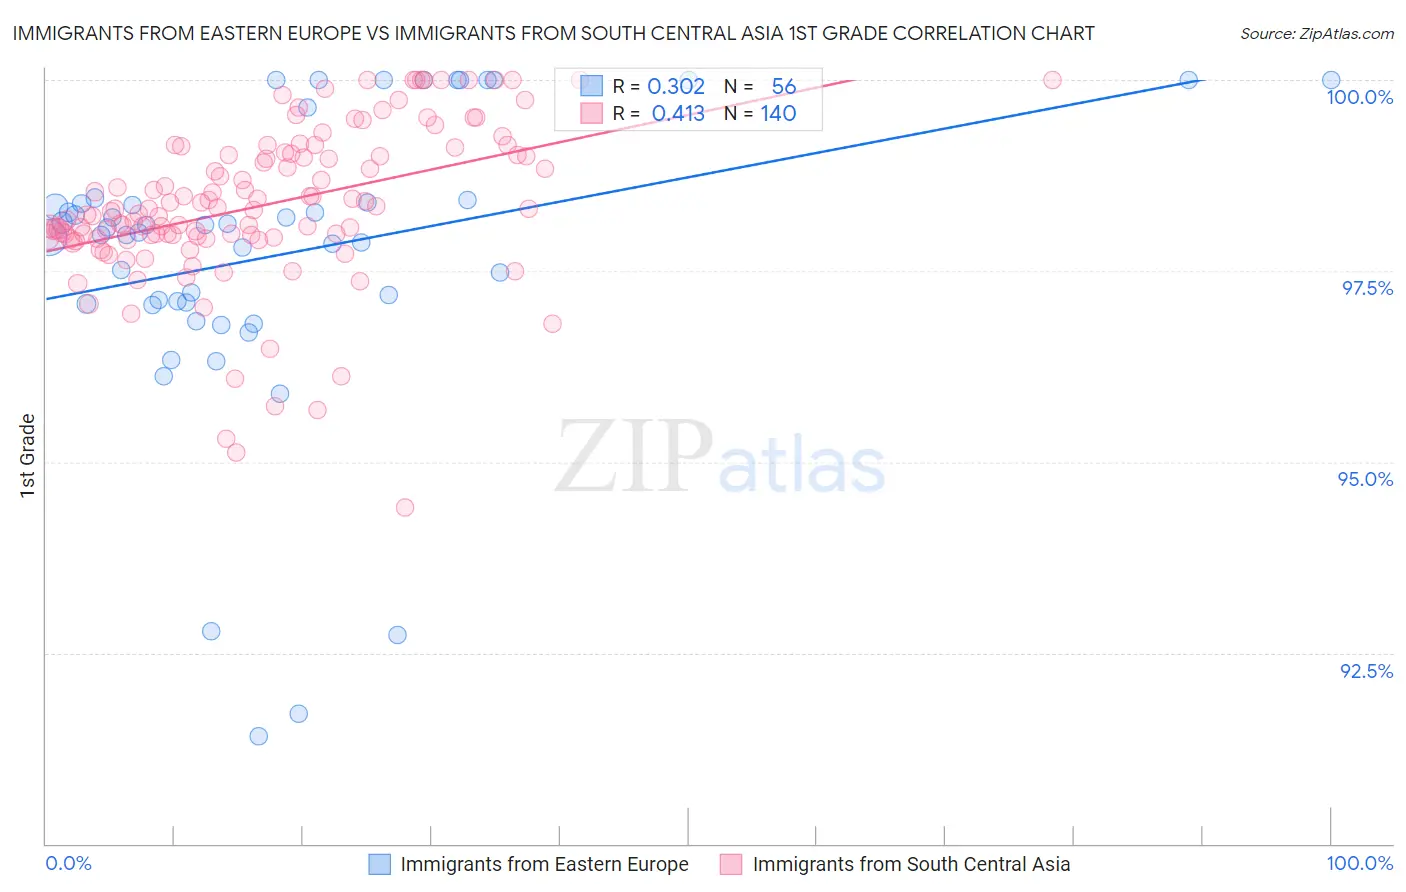 Immigrants from Eastern Europe vs Immigrants from South Central Asia 1st Grade